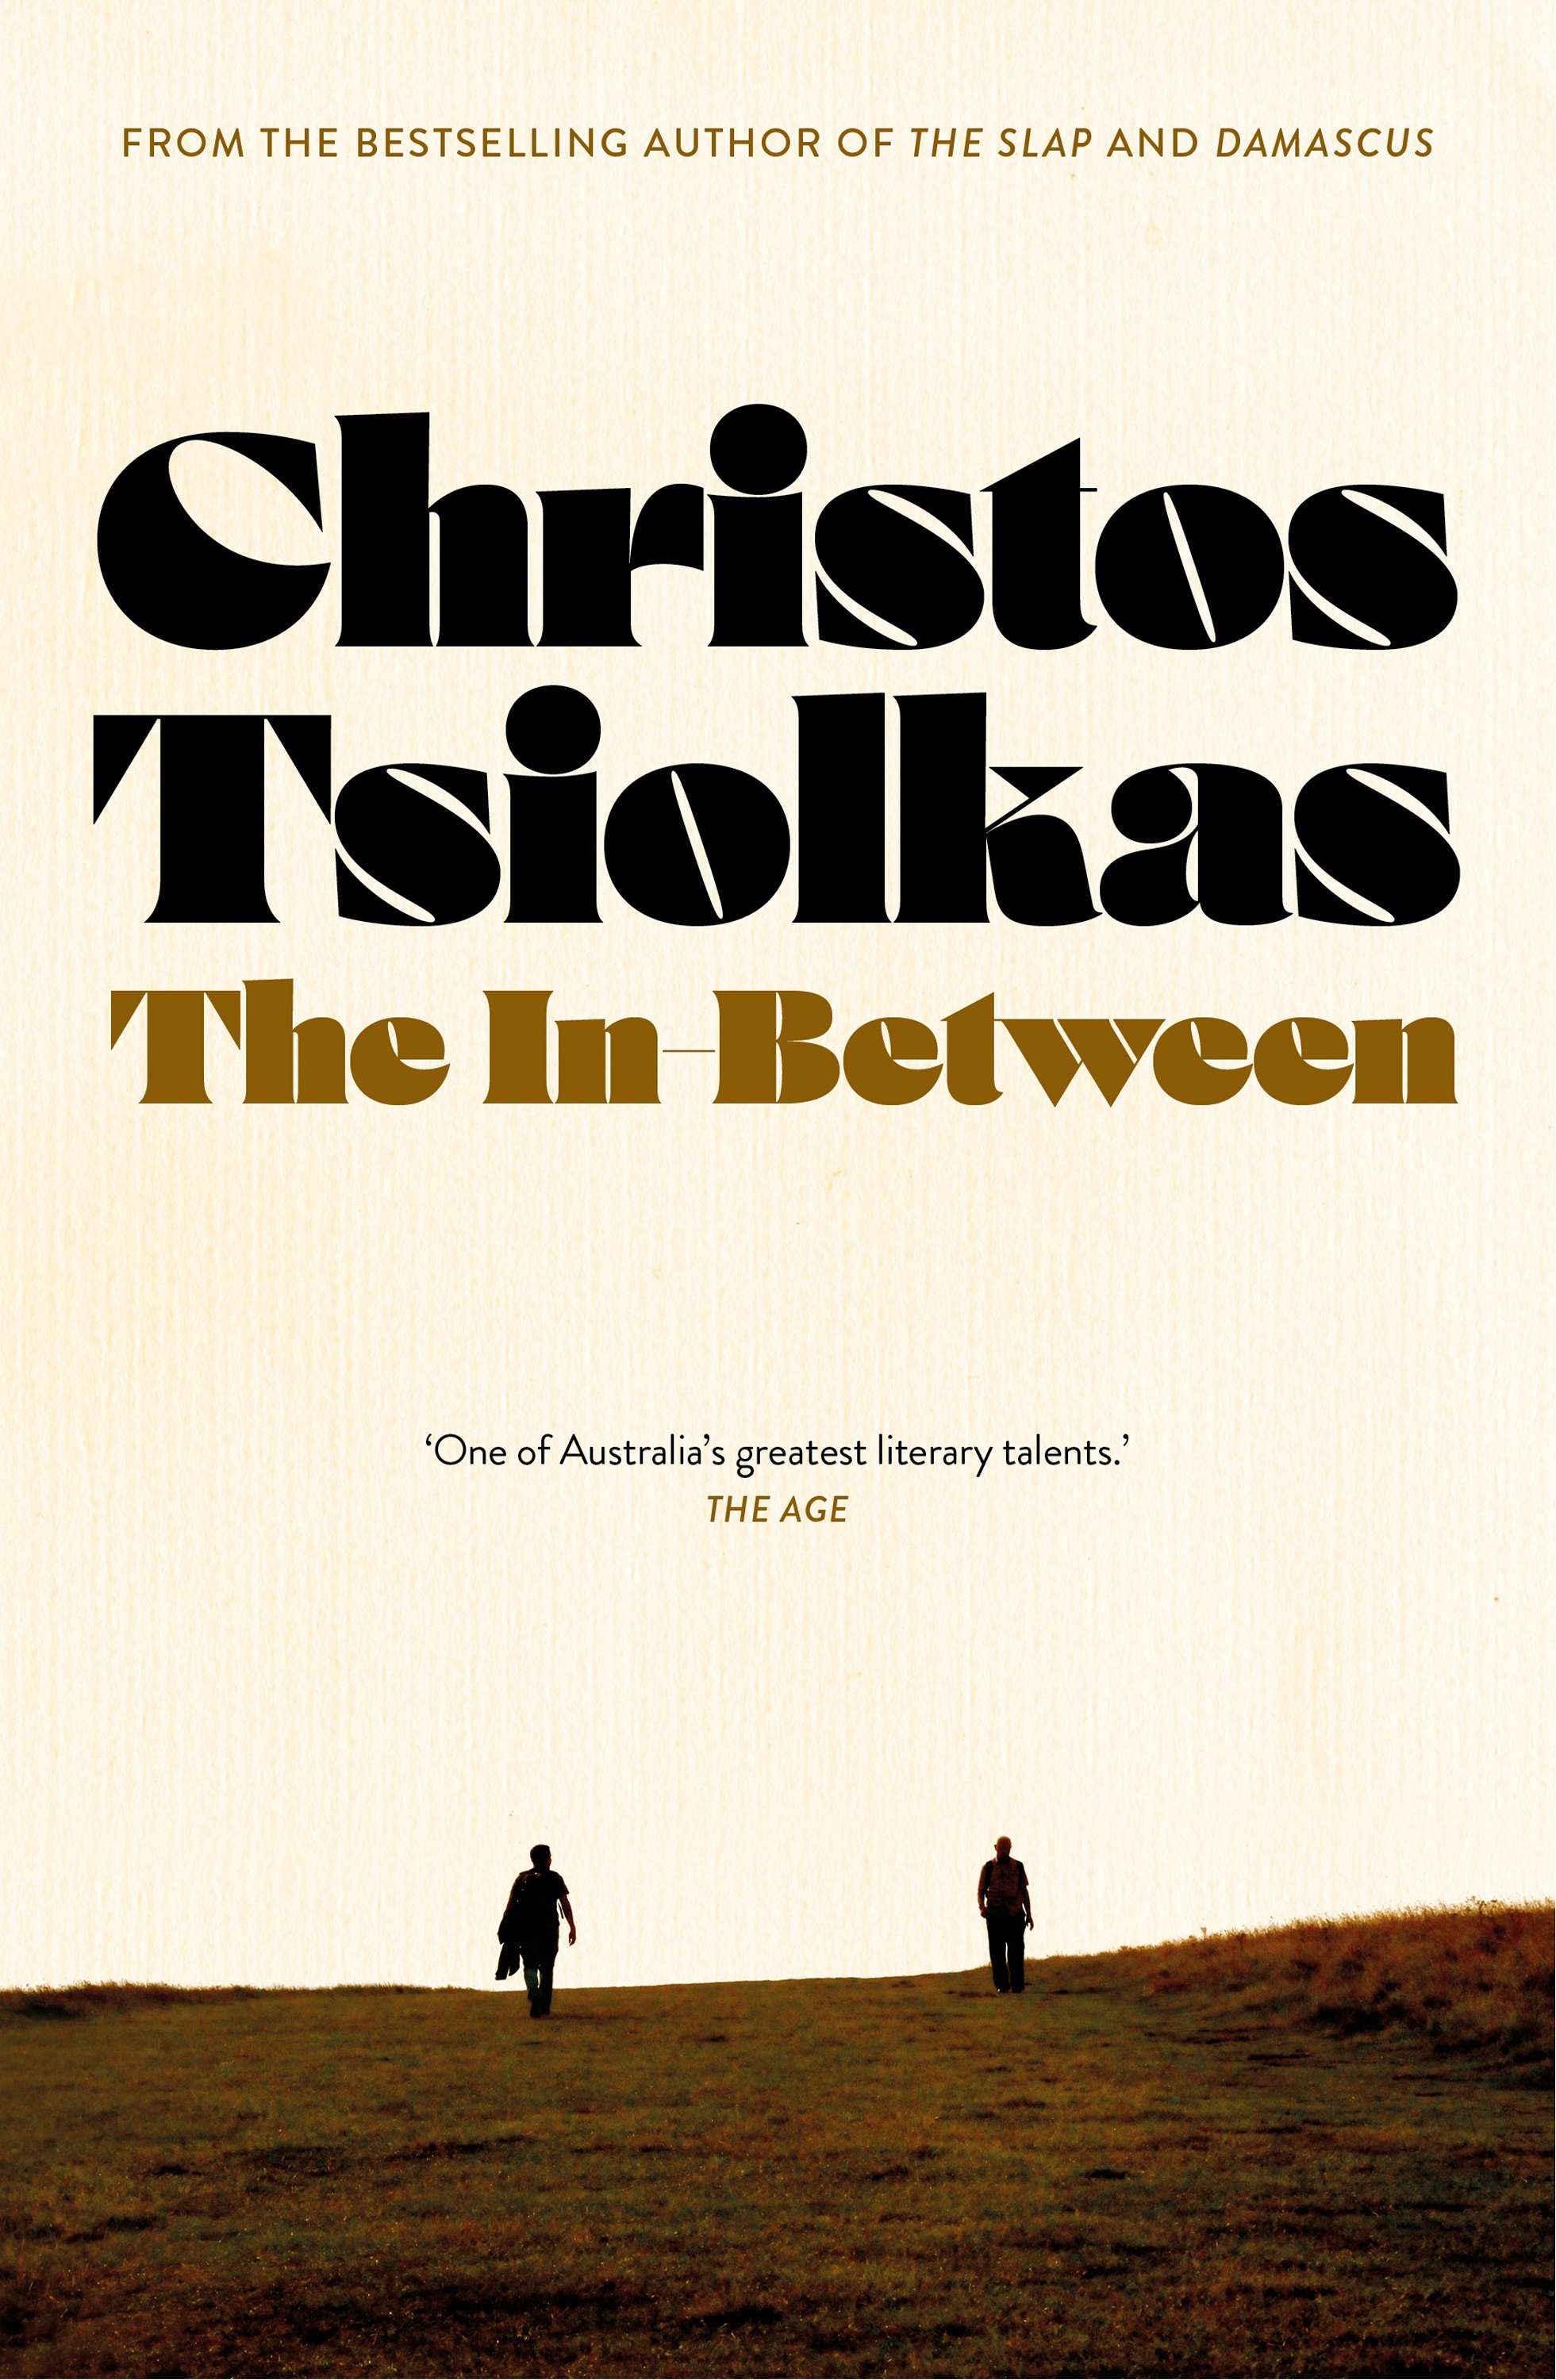 A book cover showing two people walking over a silhouetted hill; title and author printed in 70s-style text up the top